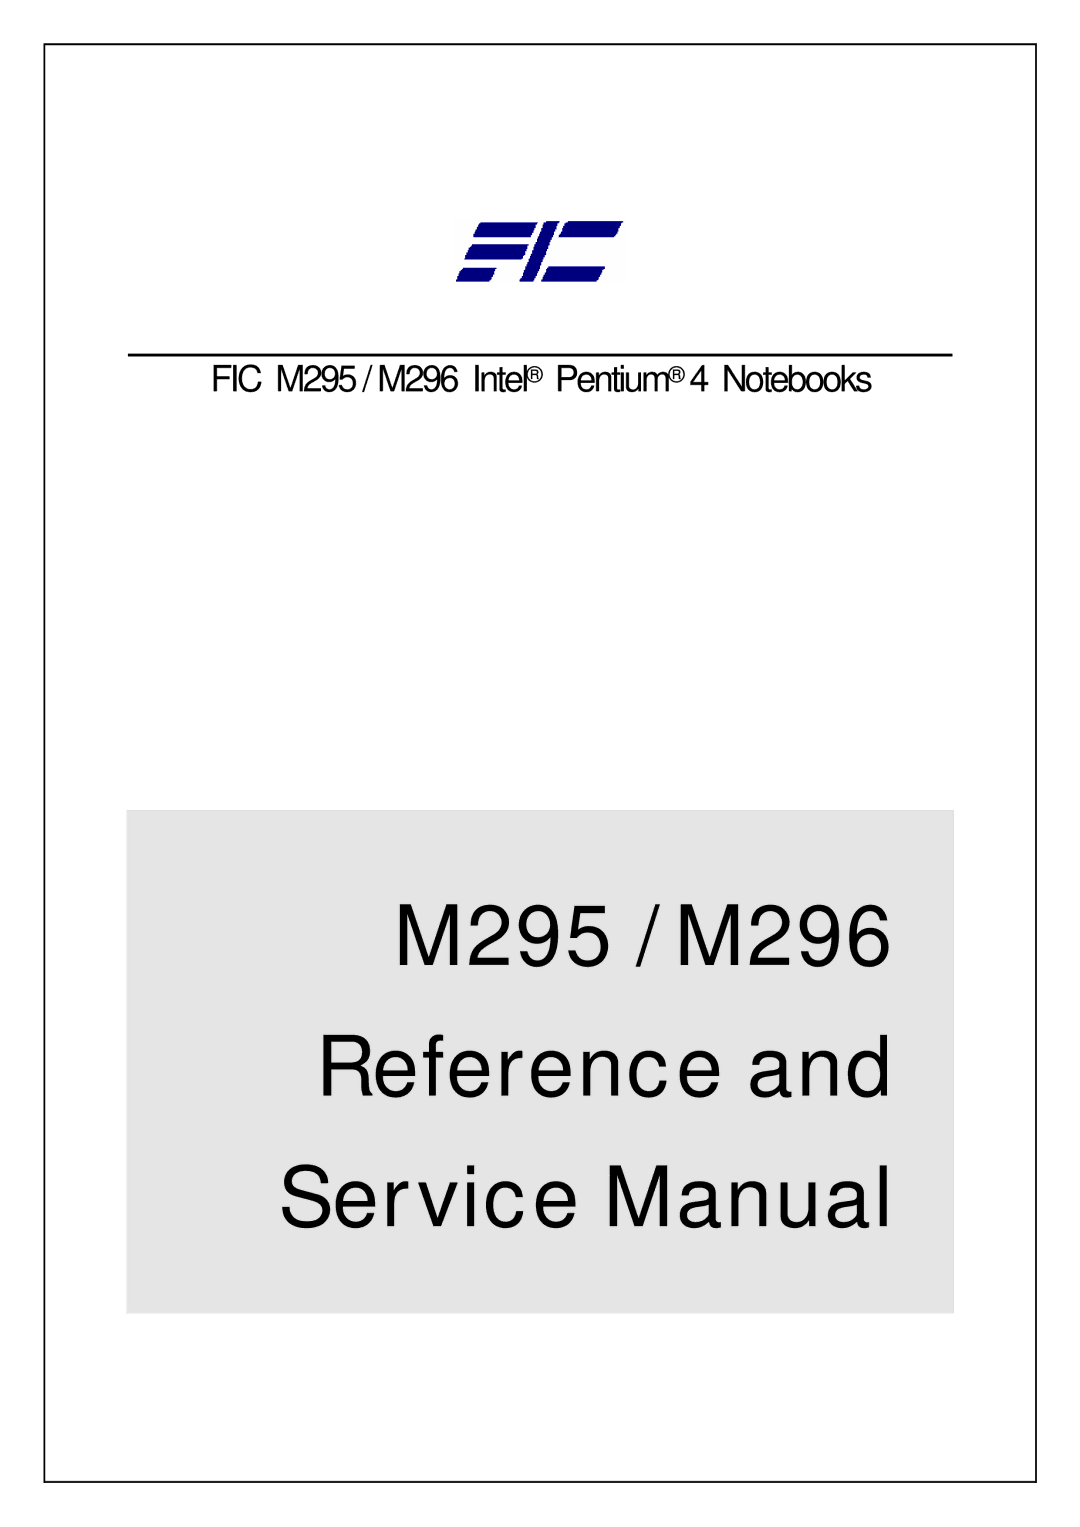 FIC service manual M295 / M296 Reference 